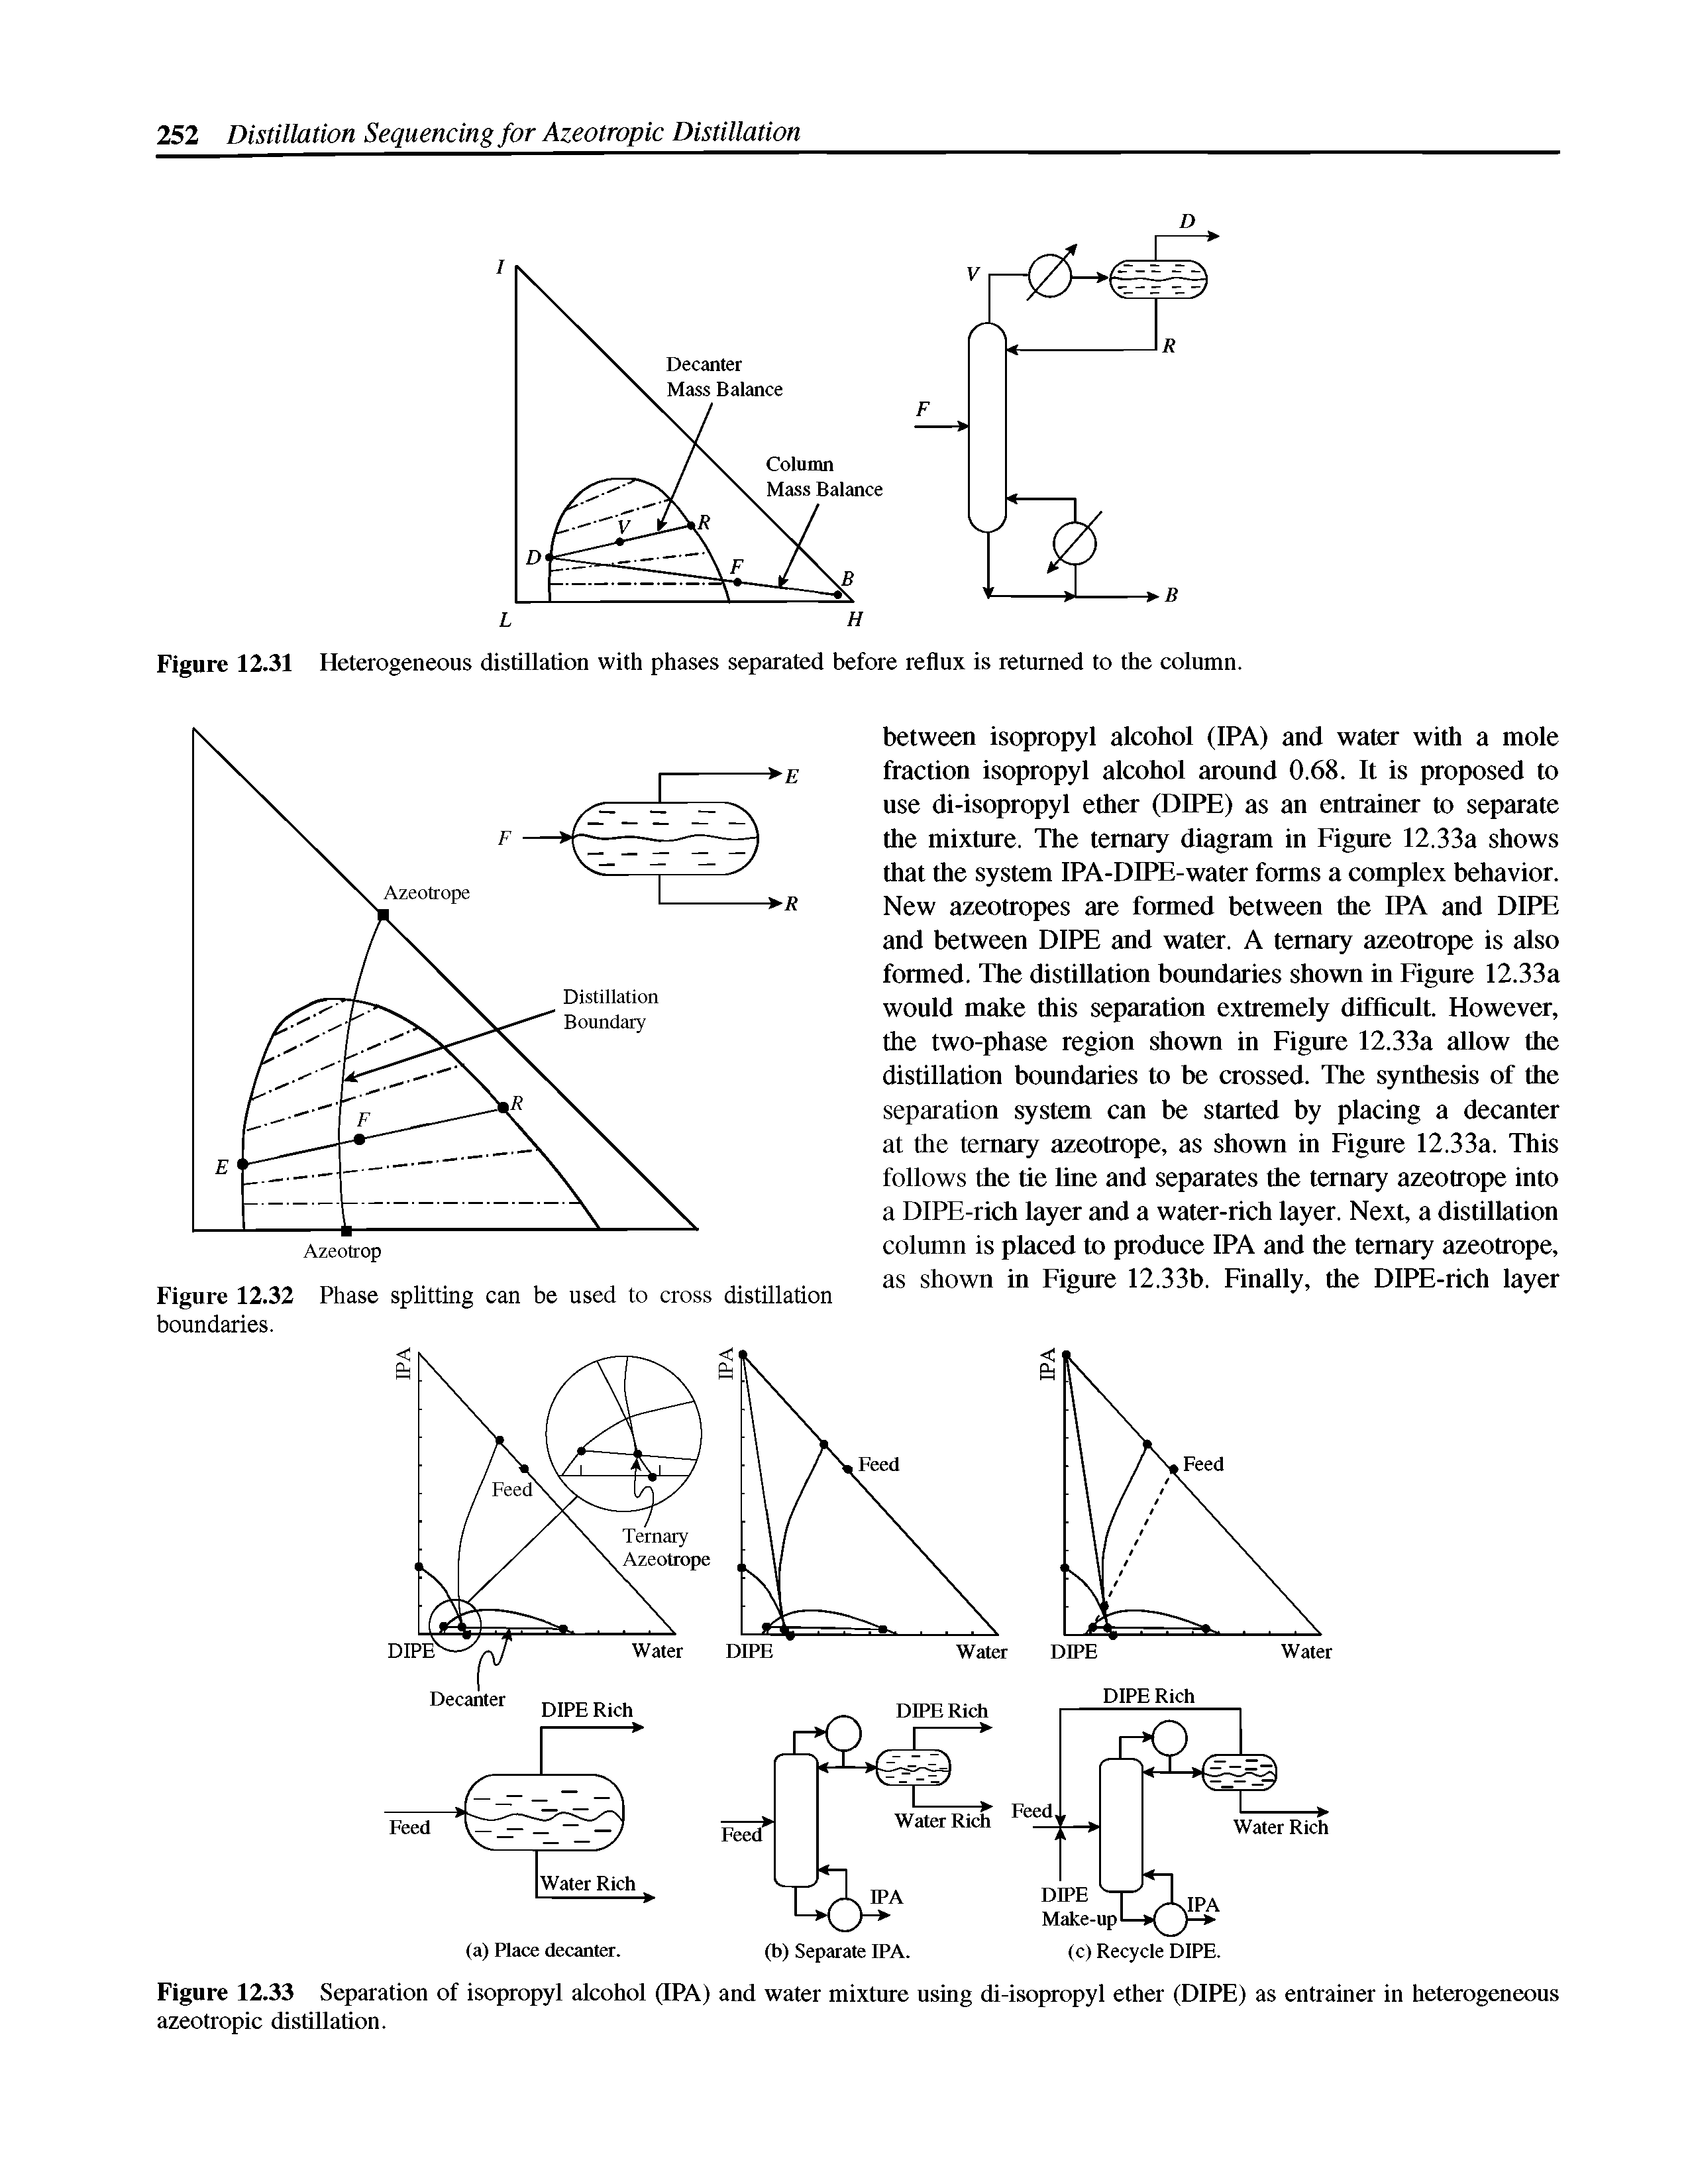 Figure 12.32 Phase splitting can be used to cross distillation boundaries.